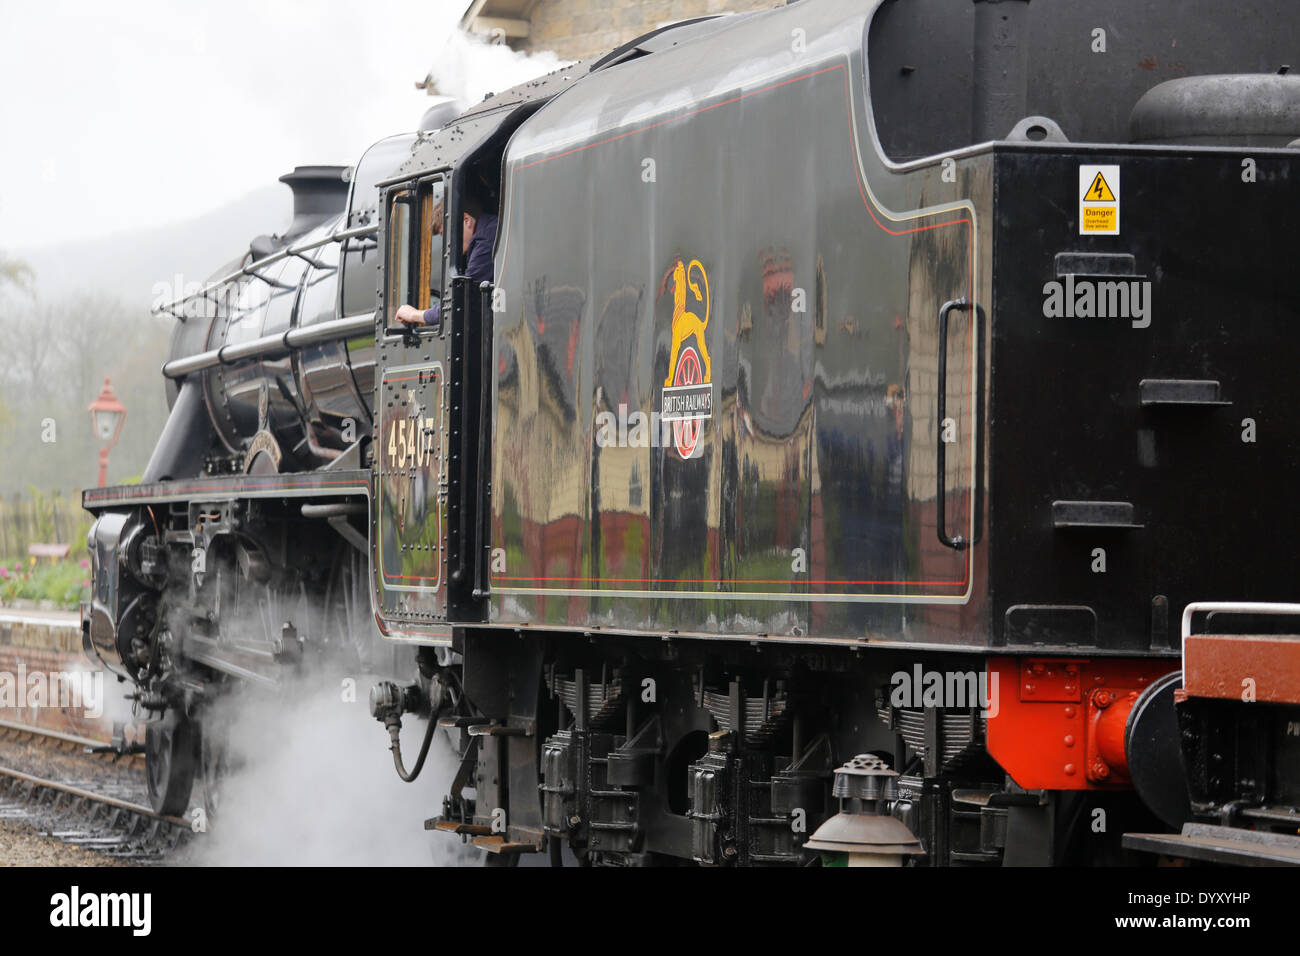 North Yorkshire Moors Railway; Levisham, North Yorkshire. 27th Apr, 2014.  LMS Stanier Class 5 4-6-0 Black 5 No. 45407 ‘Lancashire Fusilier’ shunting freight at Levisham Station during the Spring Steam Gala for the benefit of spectators. Credit:  Alan Walmsley/Alamy Live News Stock Photo